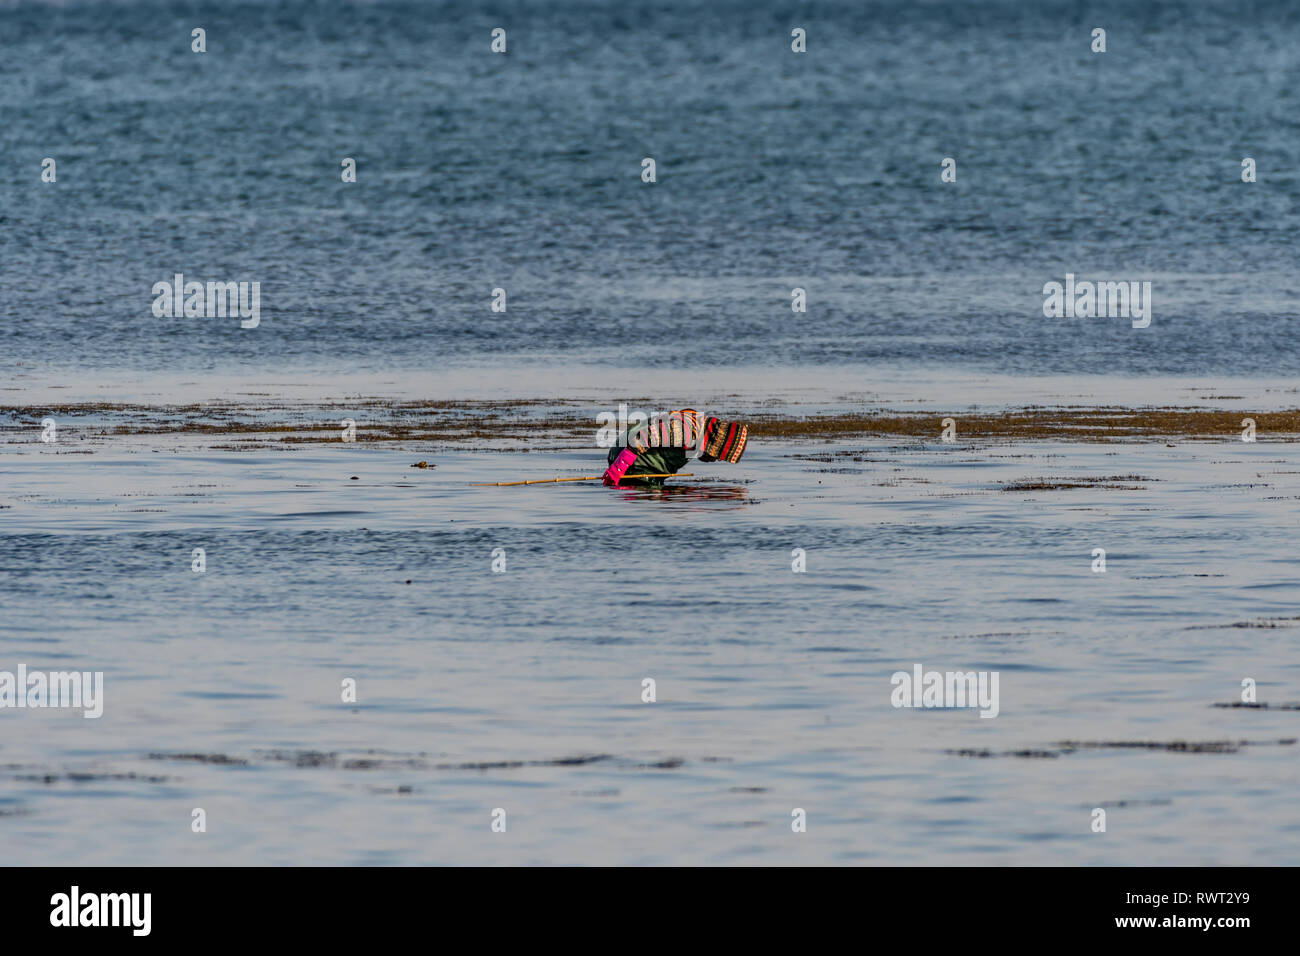 A person collecting seaweed at the sea, South Korea Stock Photo